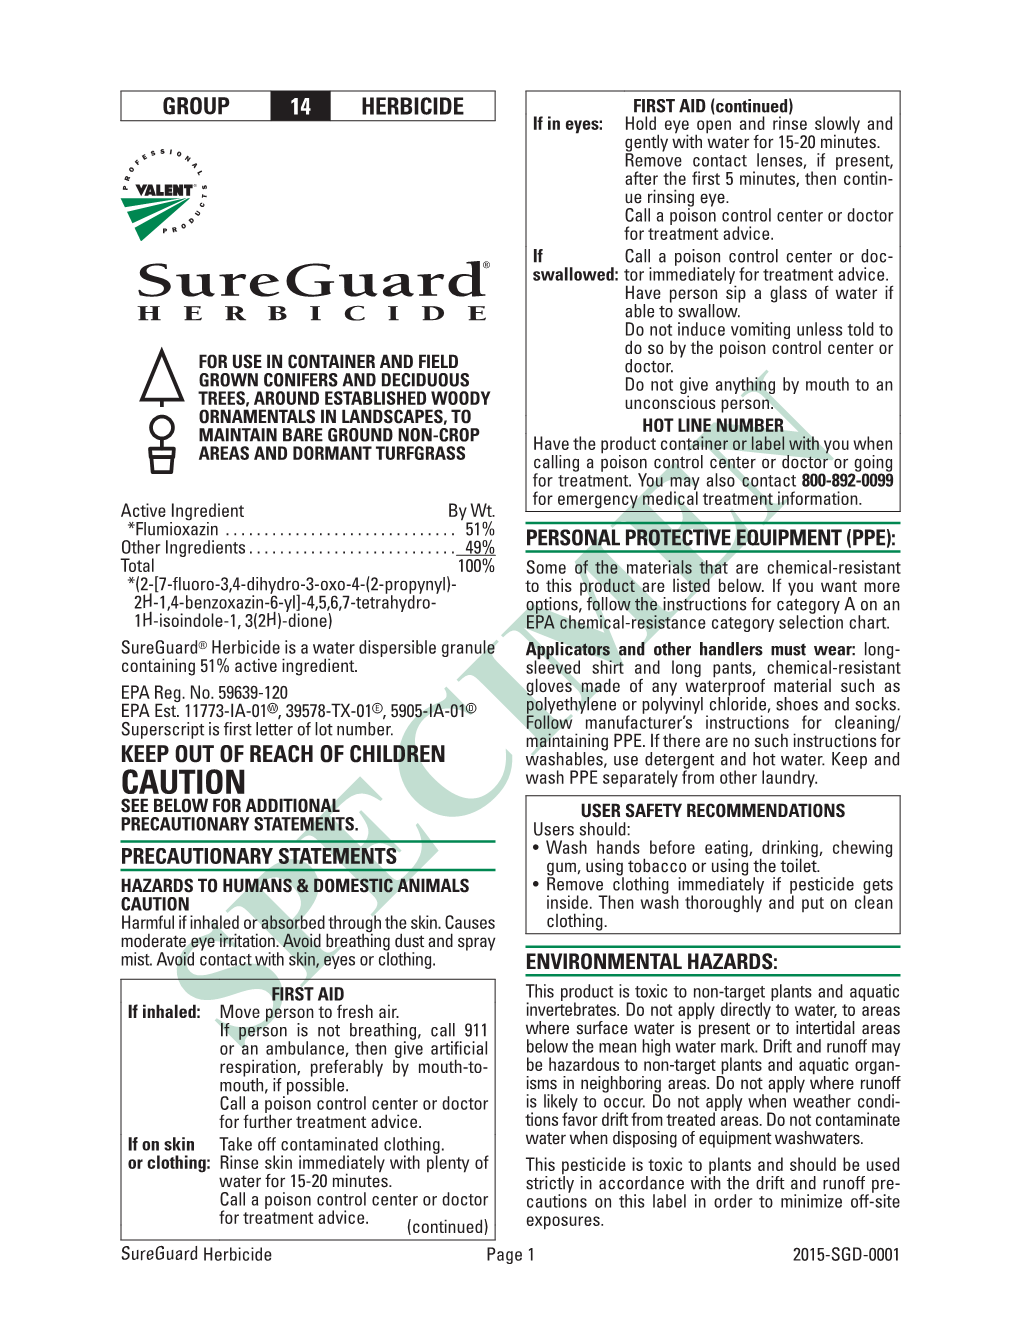 Sureguard® Herbicide Is a Water Dispersible Granule Applicators and Other Handlers Must Wear: Long- Containing 51% Active Ingredient